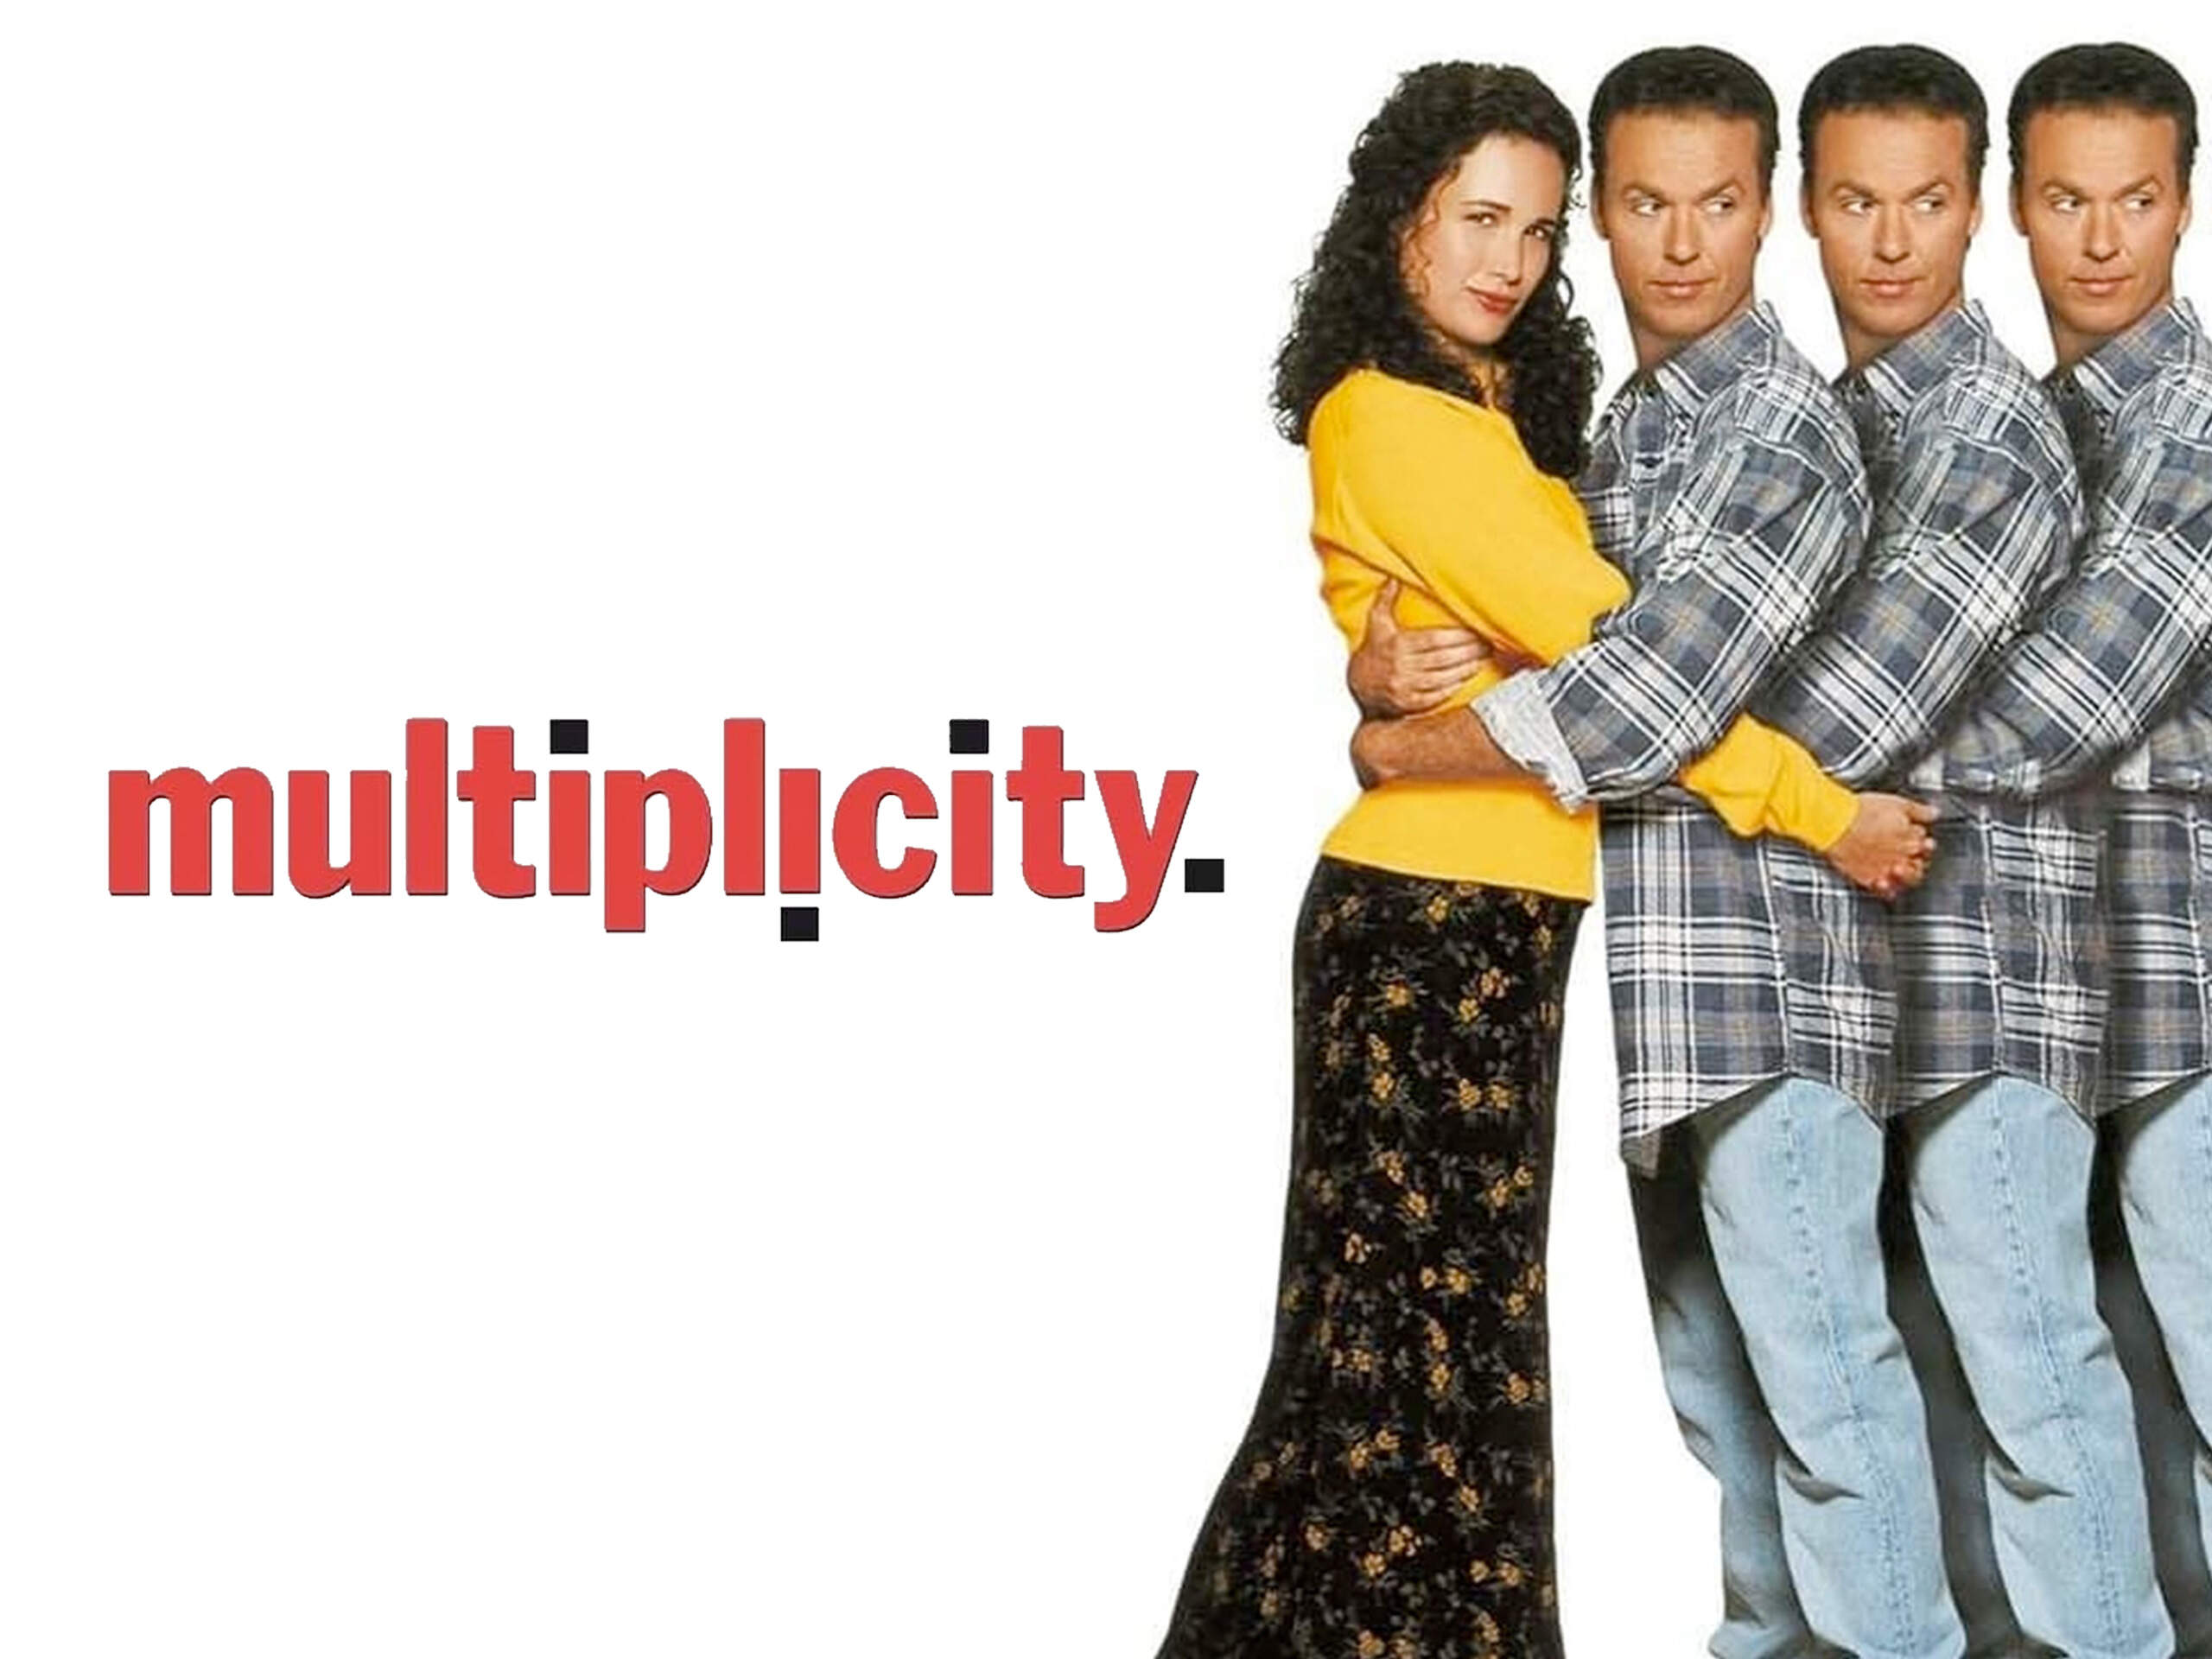 42-facts-about-the-movie-multiplicity